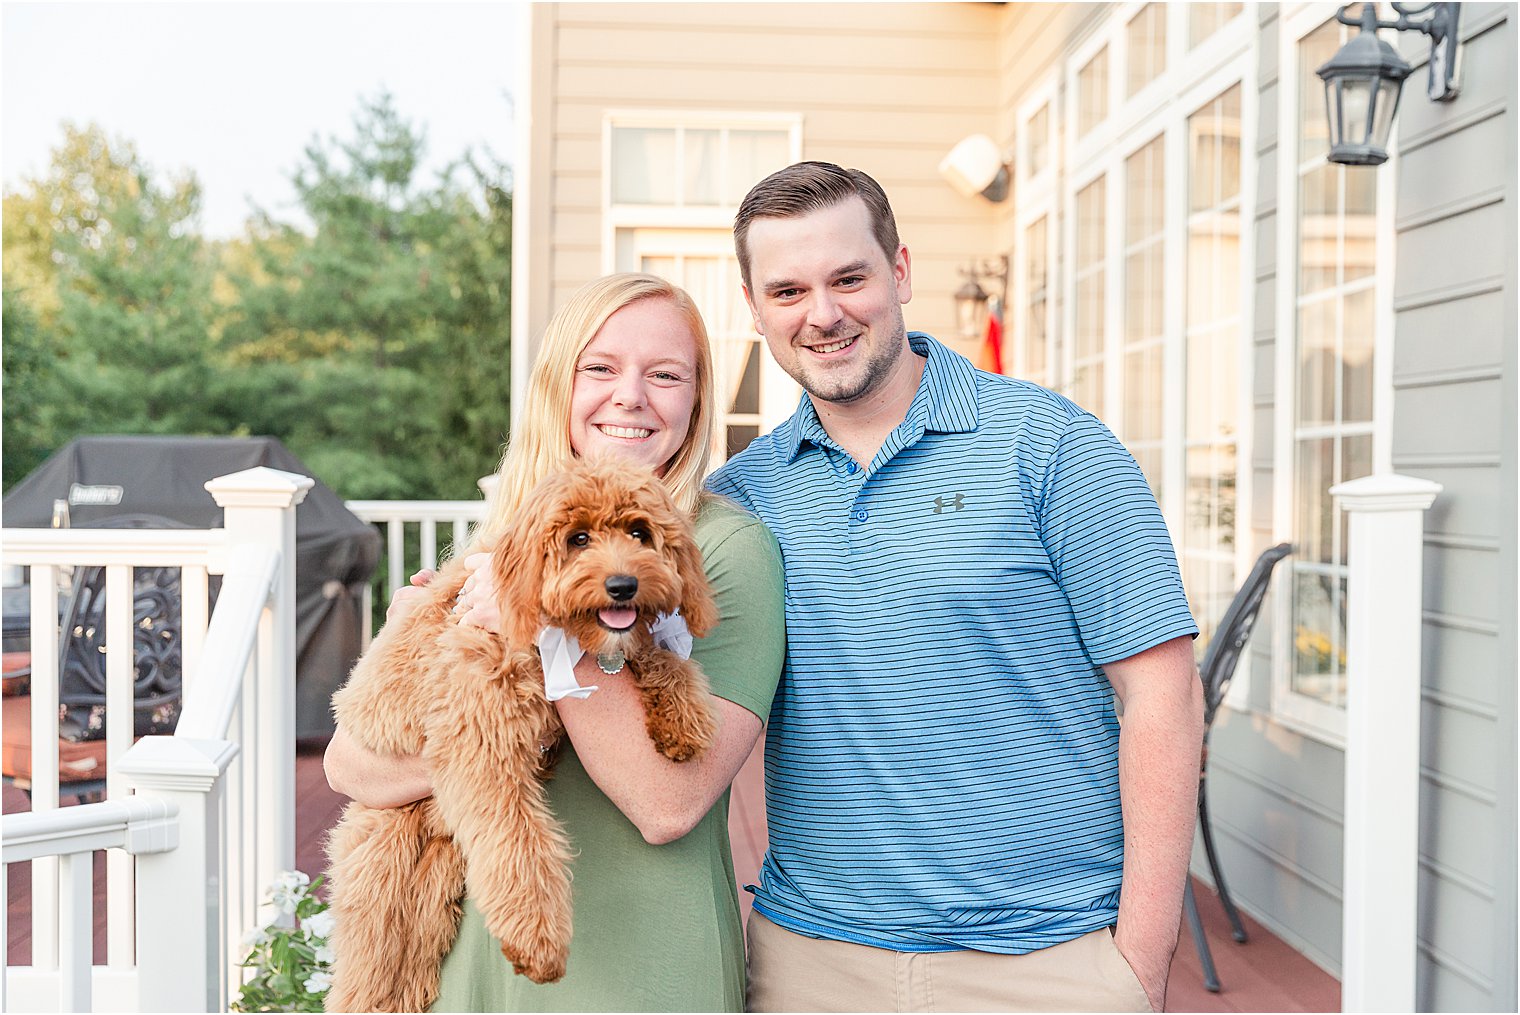 Newly engaged couple hold their dog after proposal 